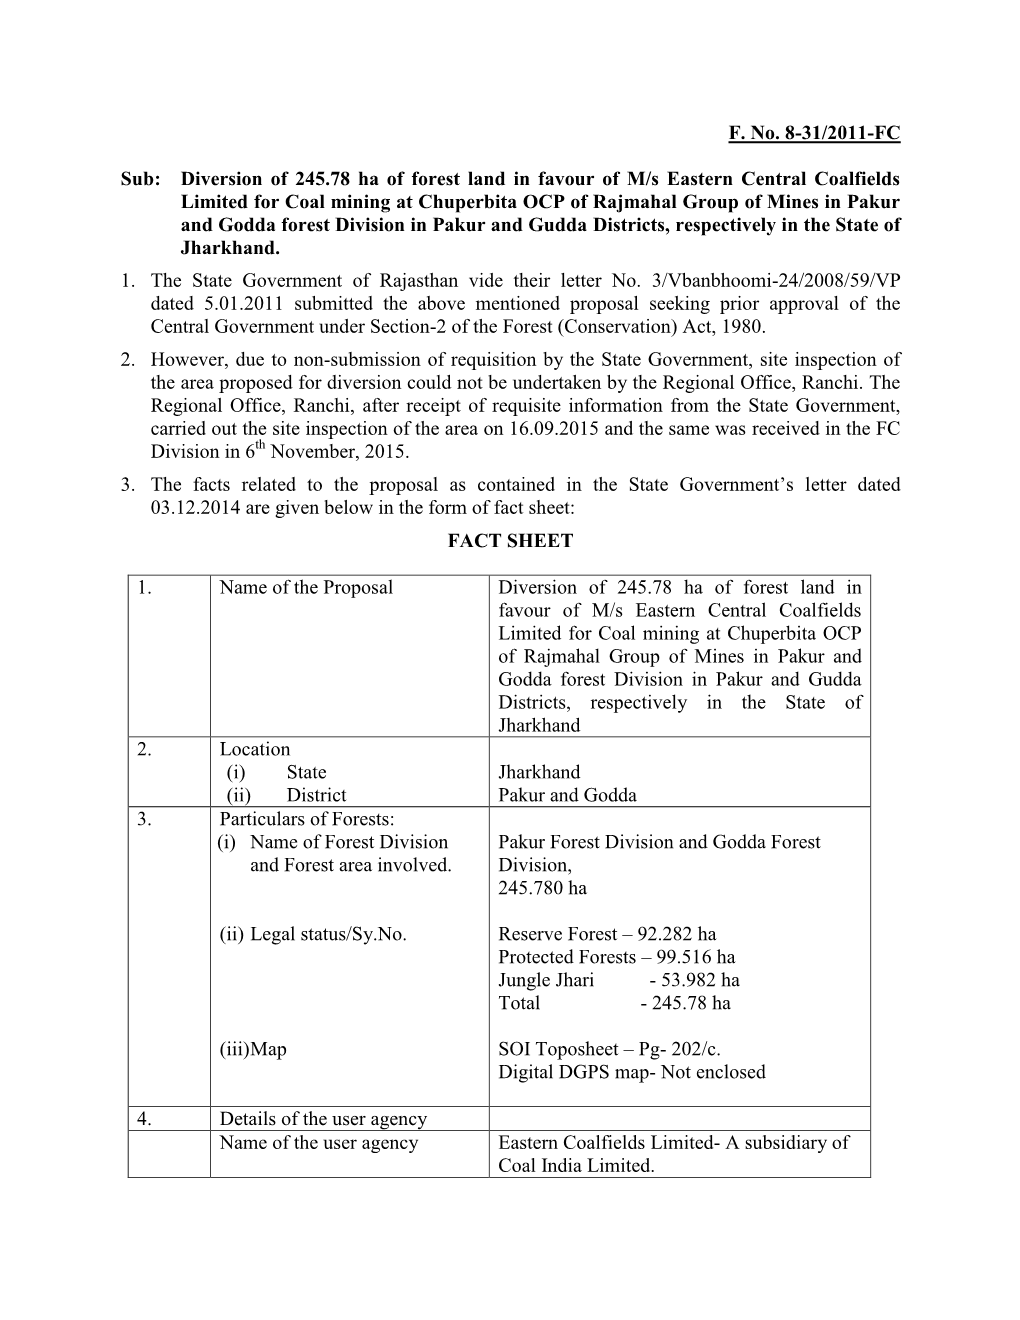 F. No. 8-31/2011-FC Sub: Diversion of 245.78 Ha of Forest Land in Favour of M/S Eastern Central Coalfields Limited for Coal